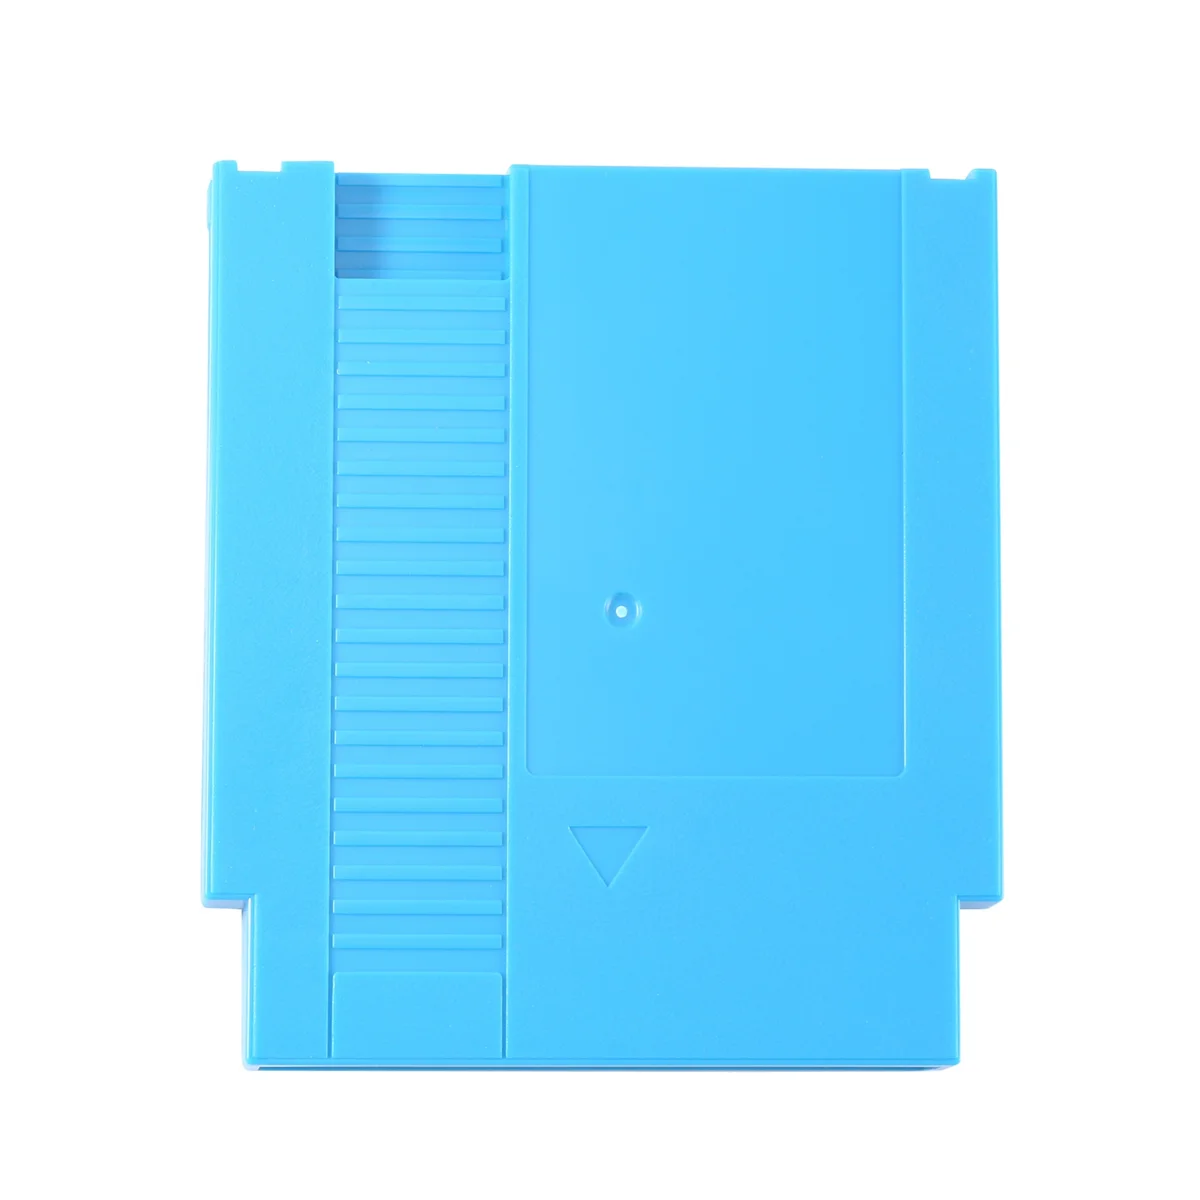 

FOREVER DUO GAMES OF NES 852 in 1 (405+447) Game Cartridge for NES Console, Total 852 Games 1024MBit Blue